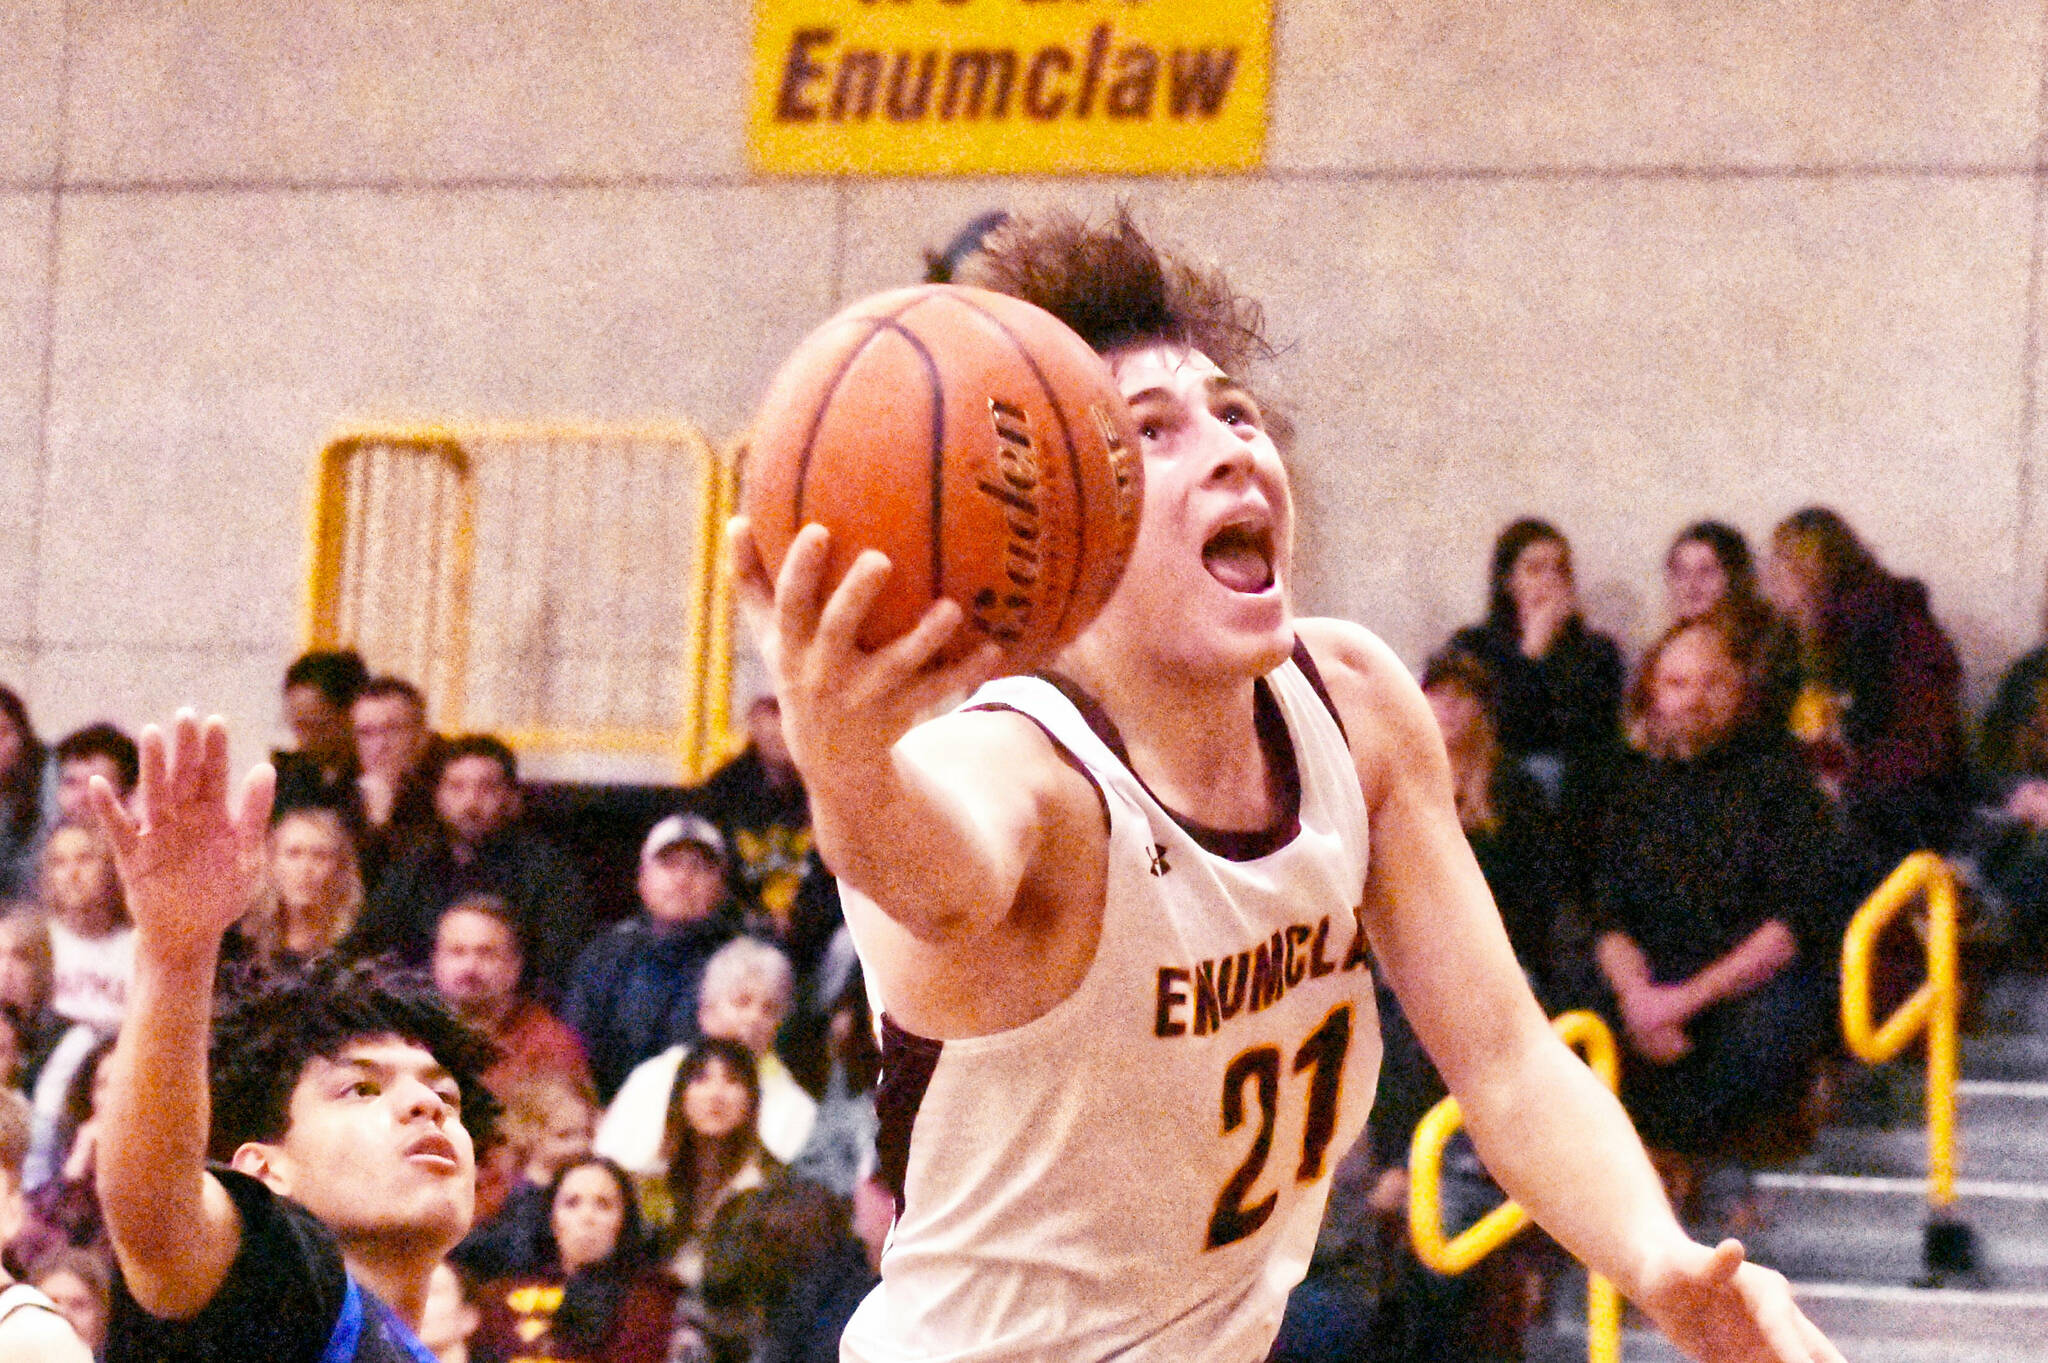 A third-quarter offensive outburst turned the tide Saturday evening and propelled the Enumclaw boys to a 68-44 victory over visiting Washington High. The Patriots walked into Chuck Smith Gymnasium with a lowly 1-16 season record but gave the Hornets all they could handle during the early going. EHS had a slim 29-27 halftime lead before romping to a 24-7 third-quarter advantage and never looking back. The win pushed Enumclaw’s record to 10-3 in SPSL 2A play and 12-6 overall. In this photo, Karson Holt drives for two of his game-high 19 points.
Photo by Kevin Hanson